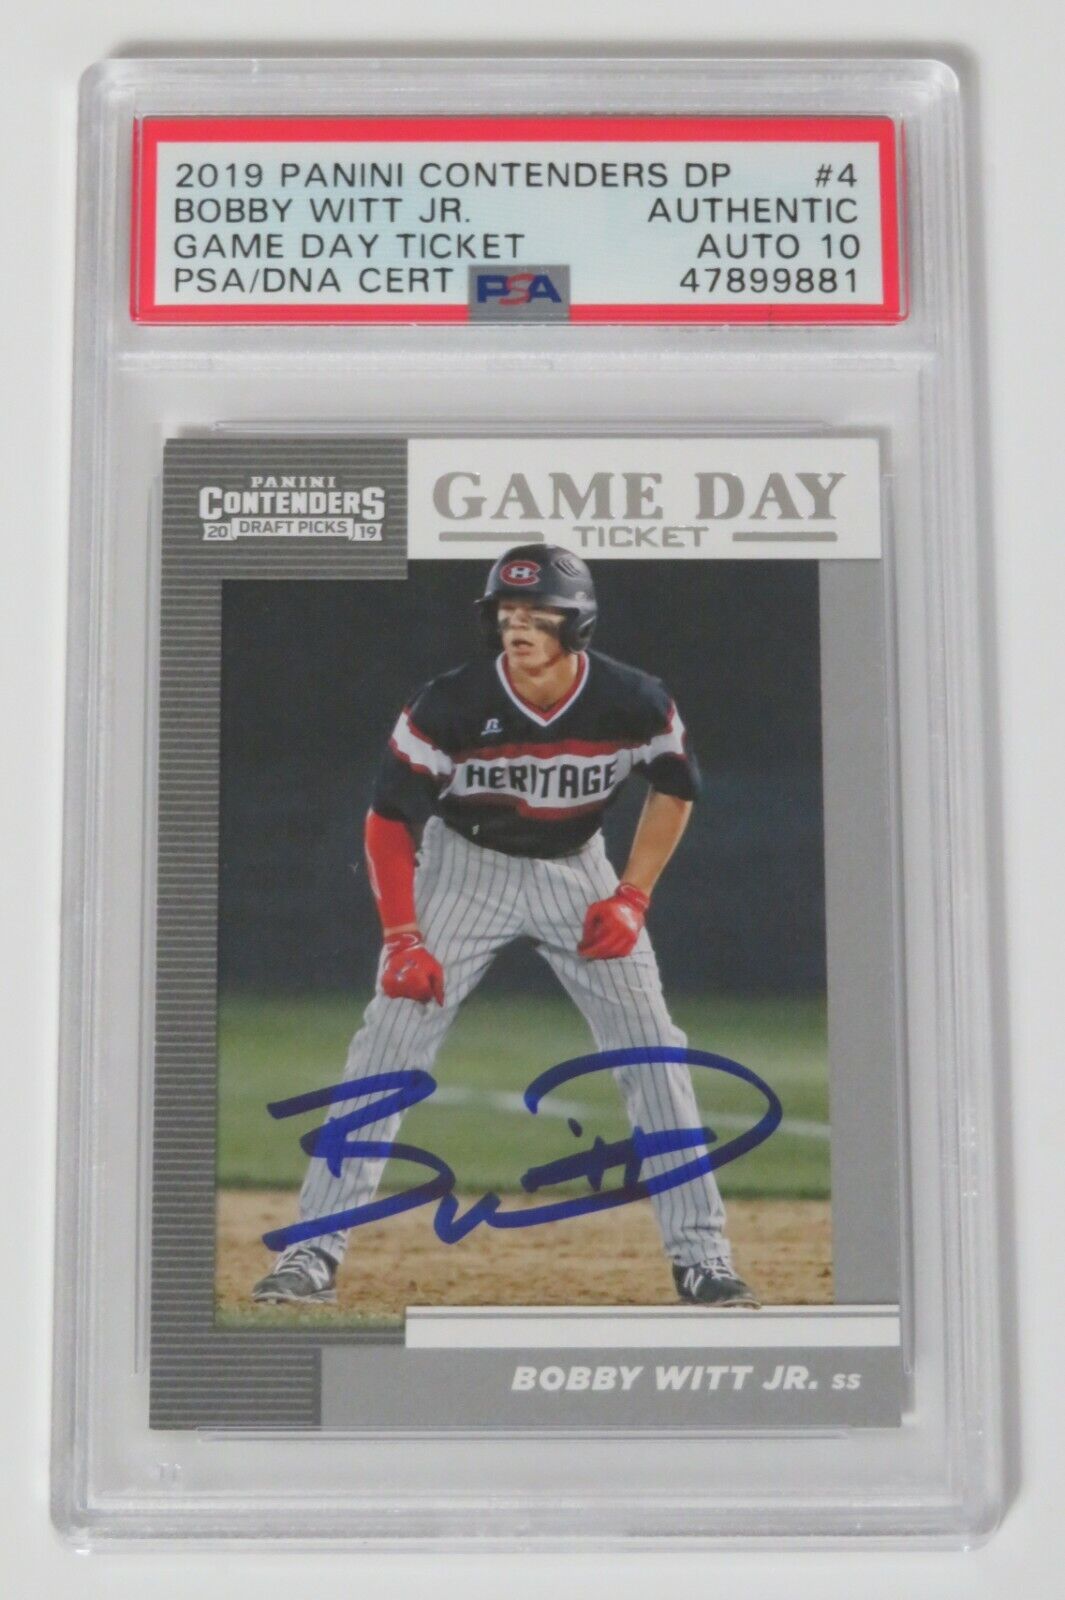 Bobby Witt Jr. 2019 Panini Contenders DP # 4 Signed Rookie RC Card PSA 10 Auto 